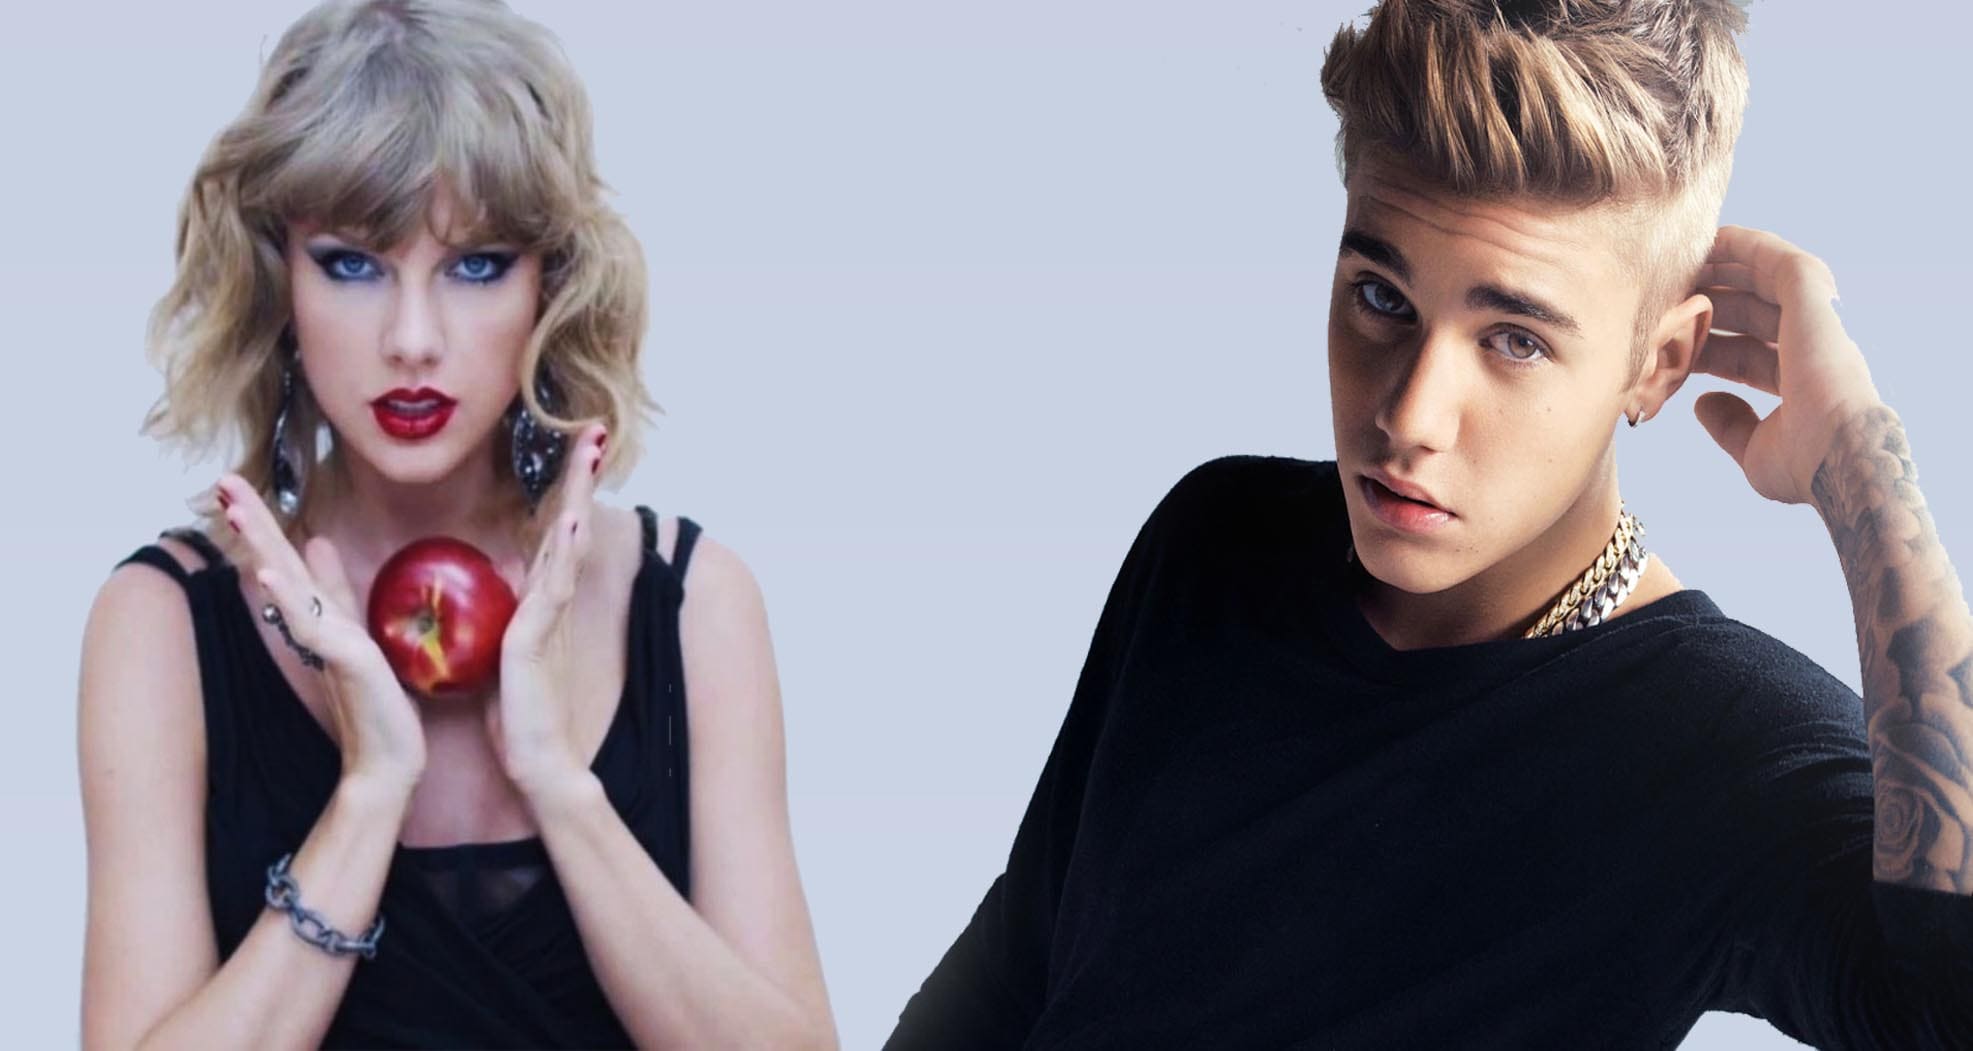 justin-bieber-comes-to-scooter-brauns-defense-after-taylor-swift-calls-him-out